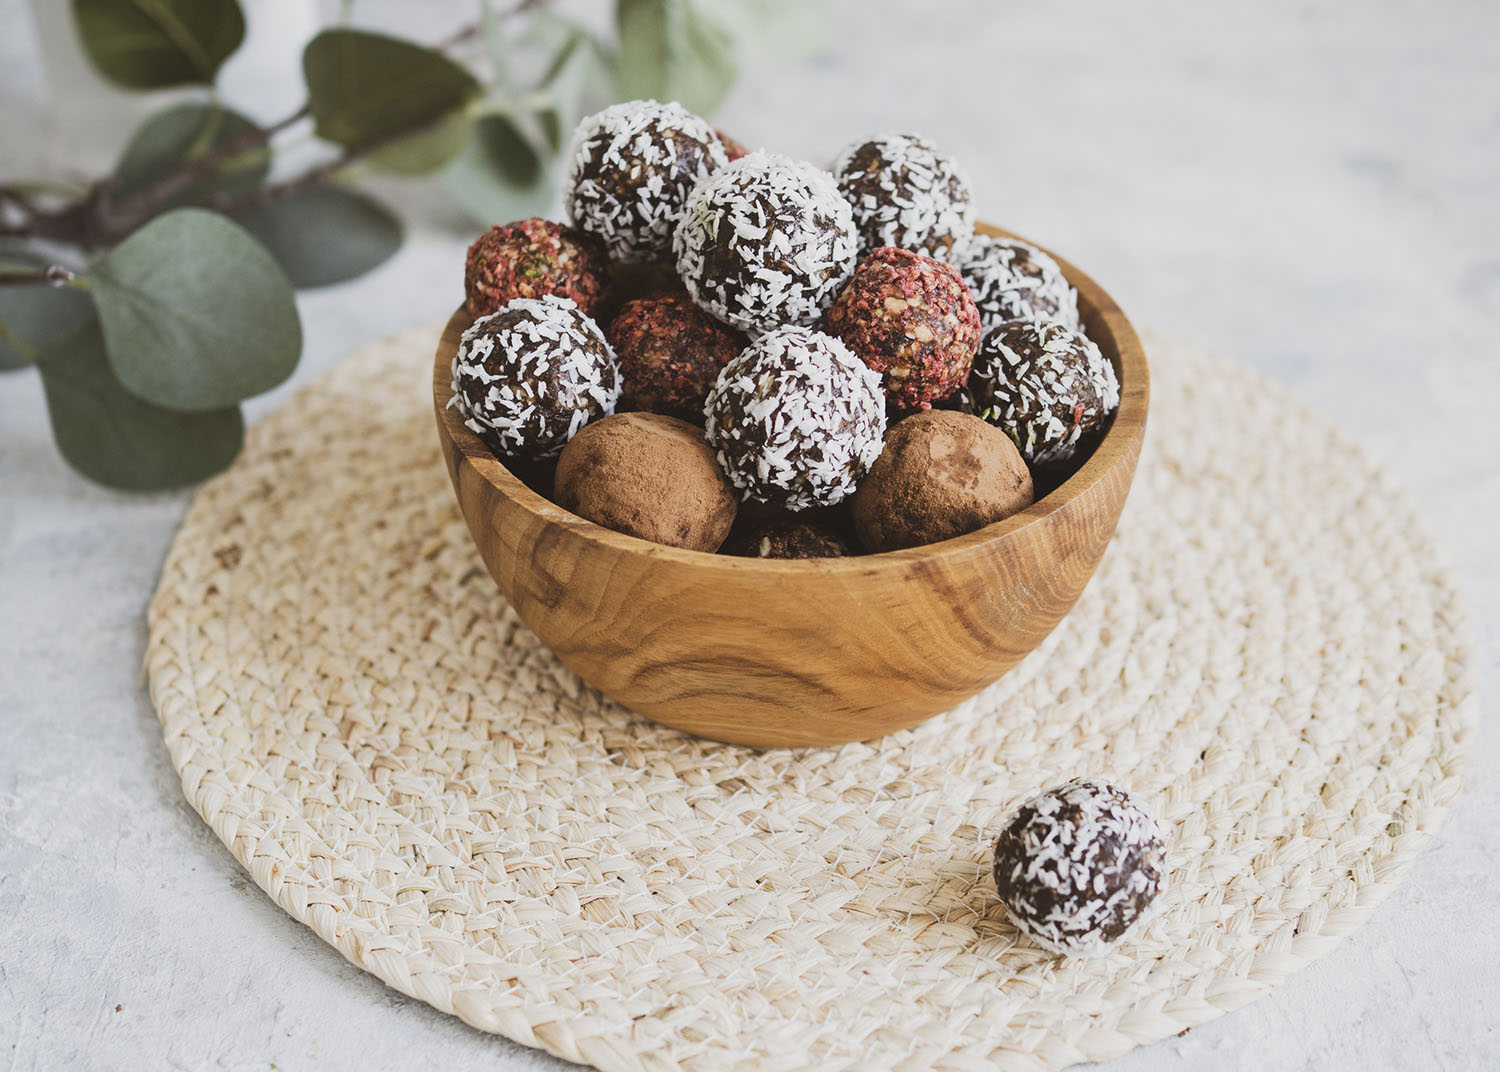 set of energy balls on a light table, bowl. Homemade healthy sweets